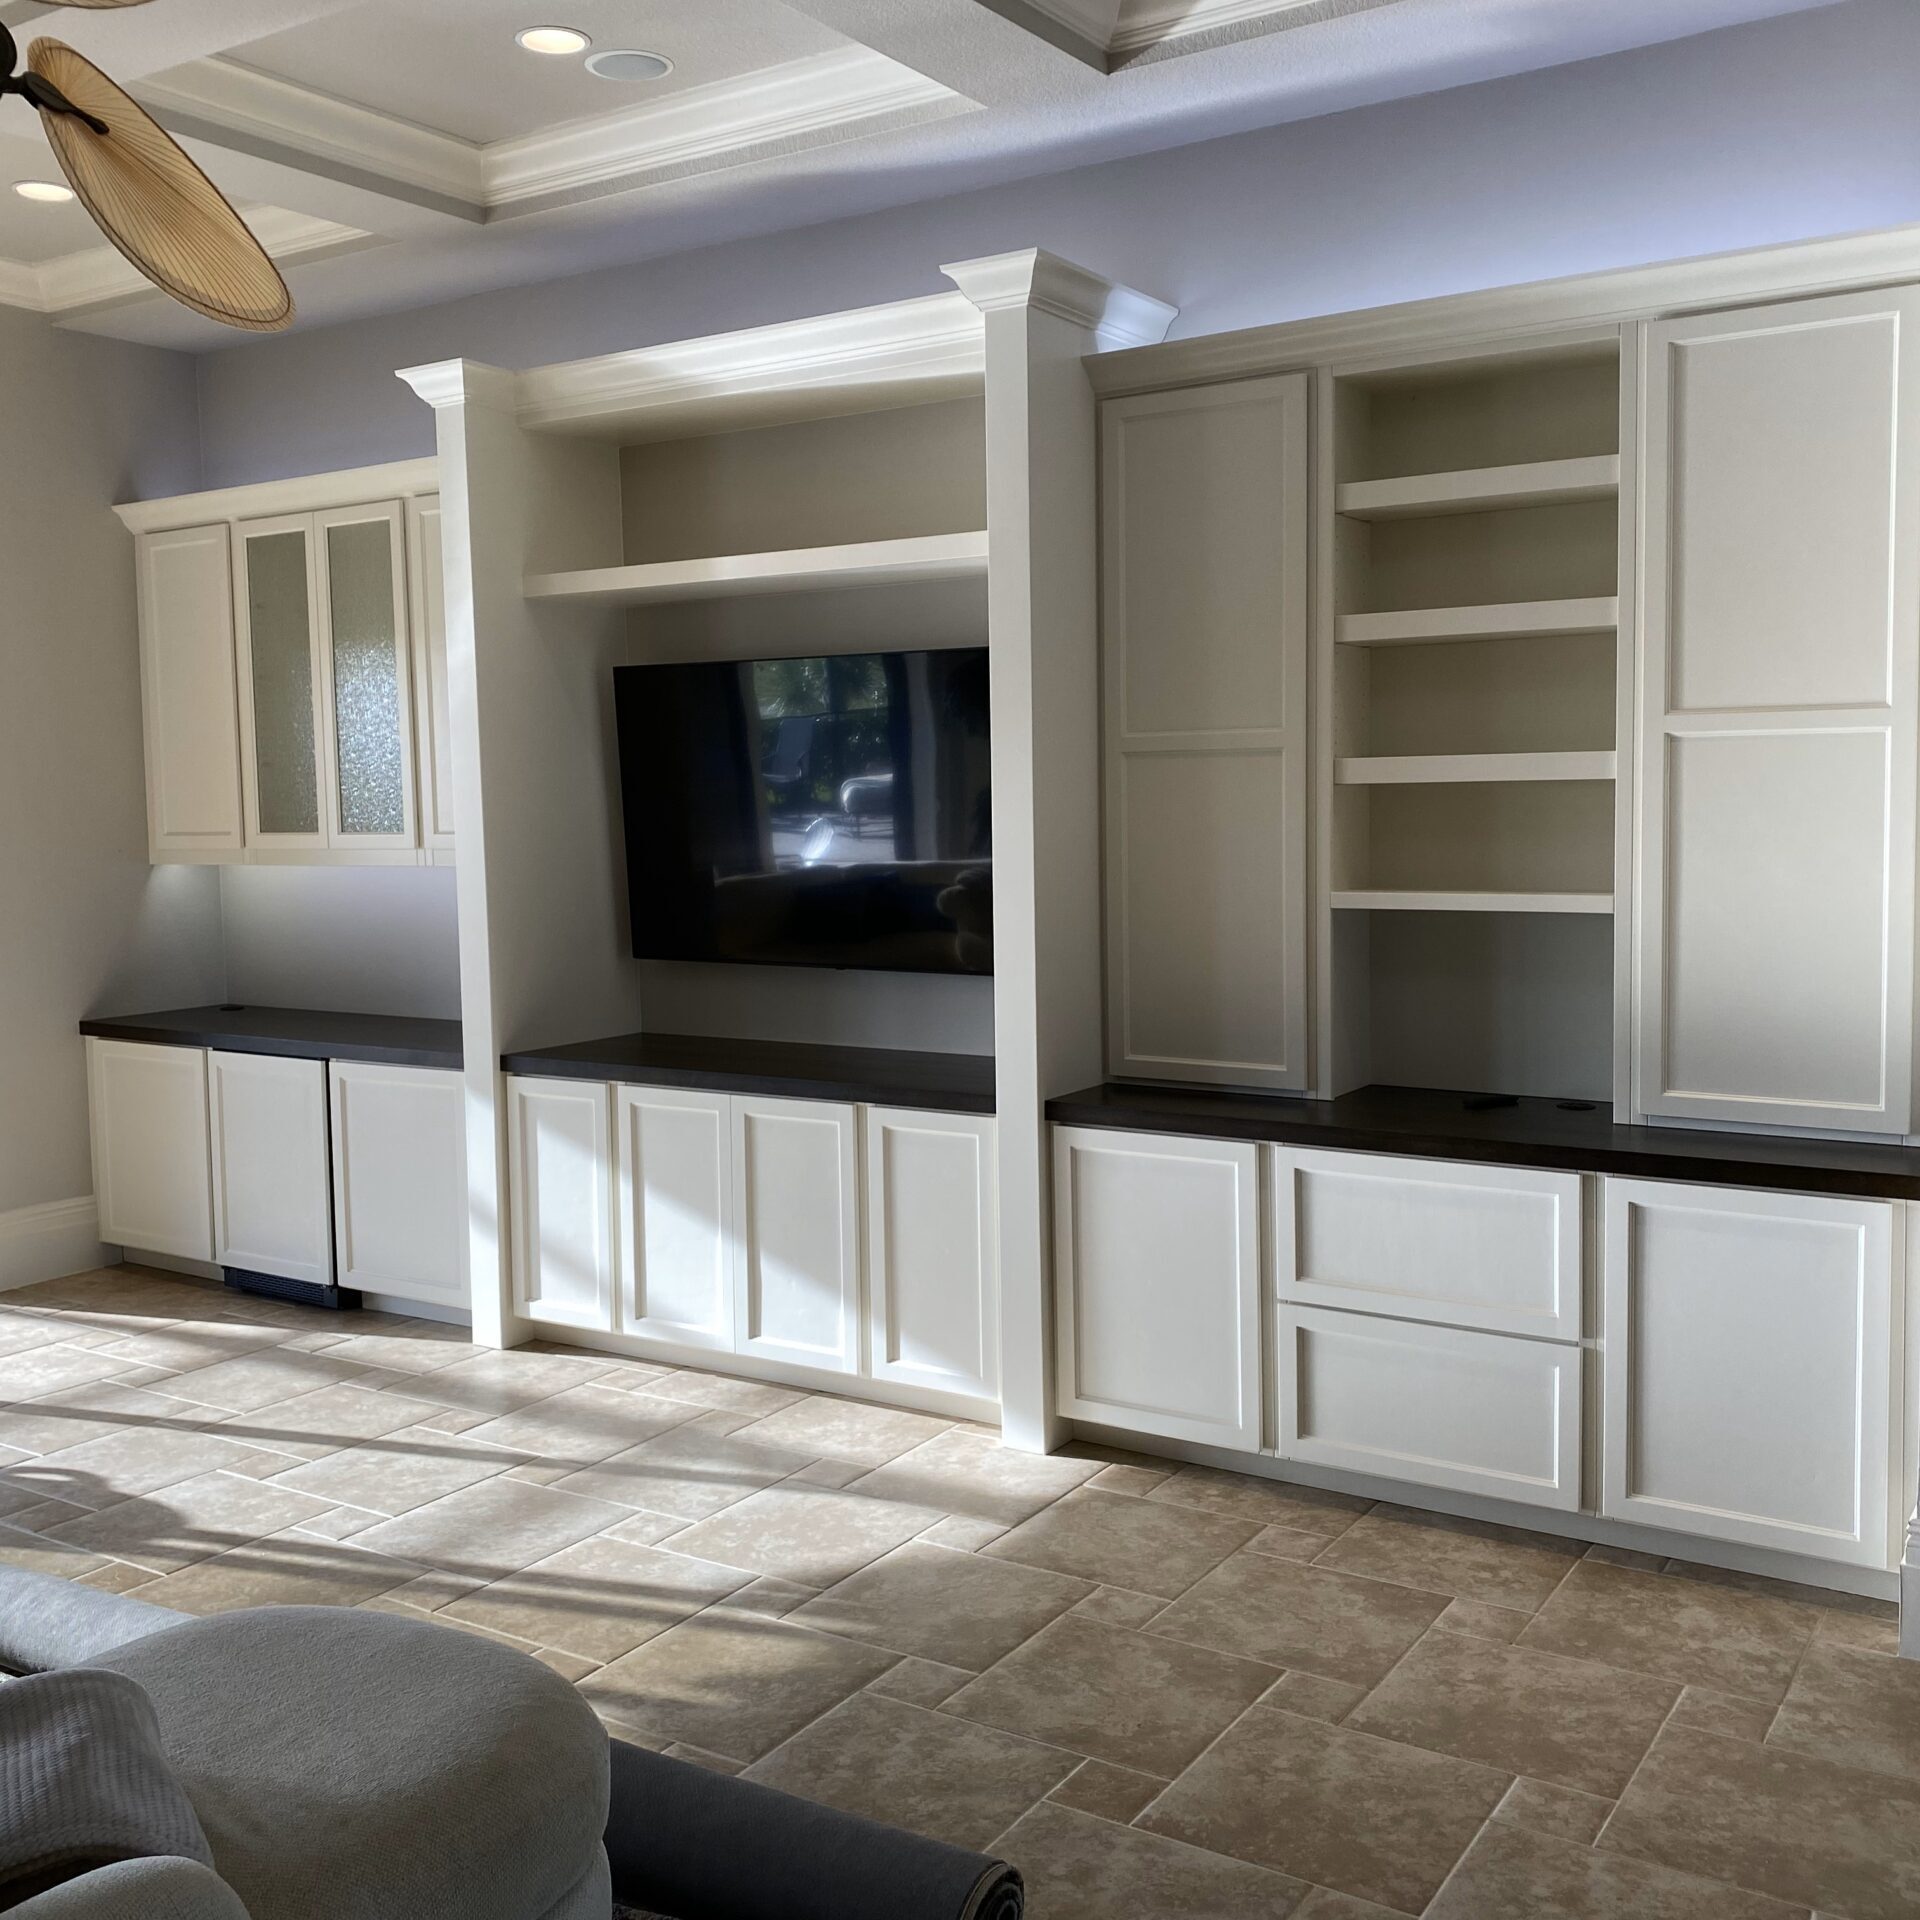 Full wall entertainment center and dry bar